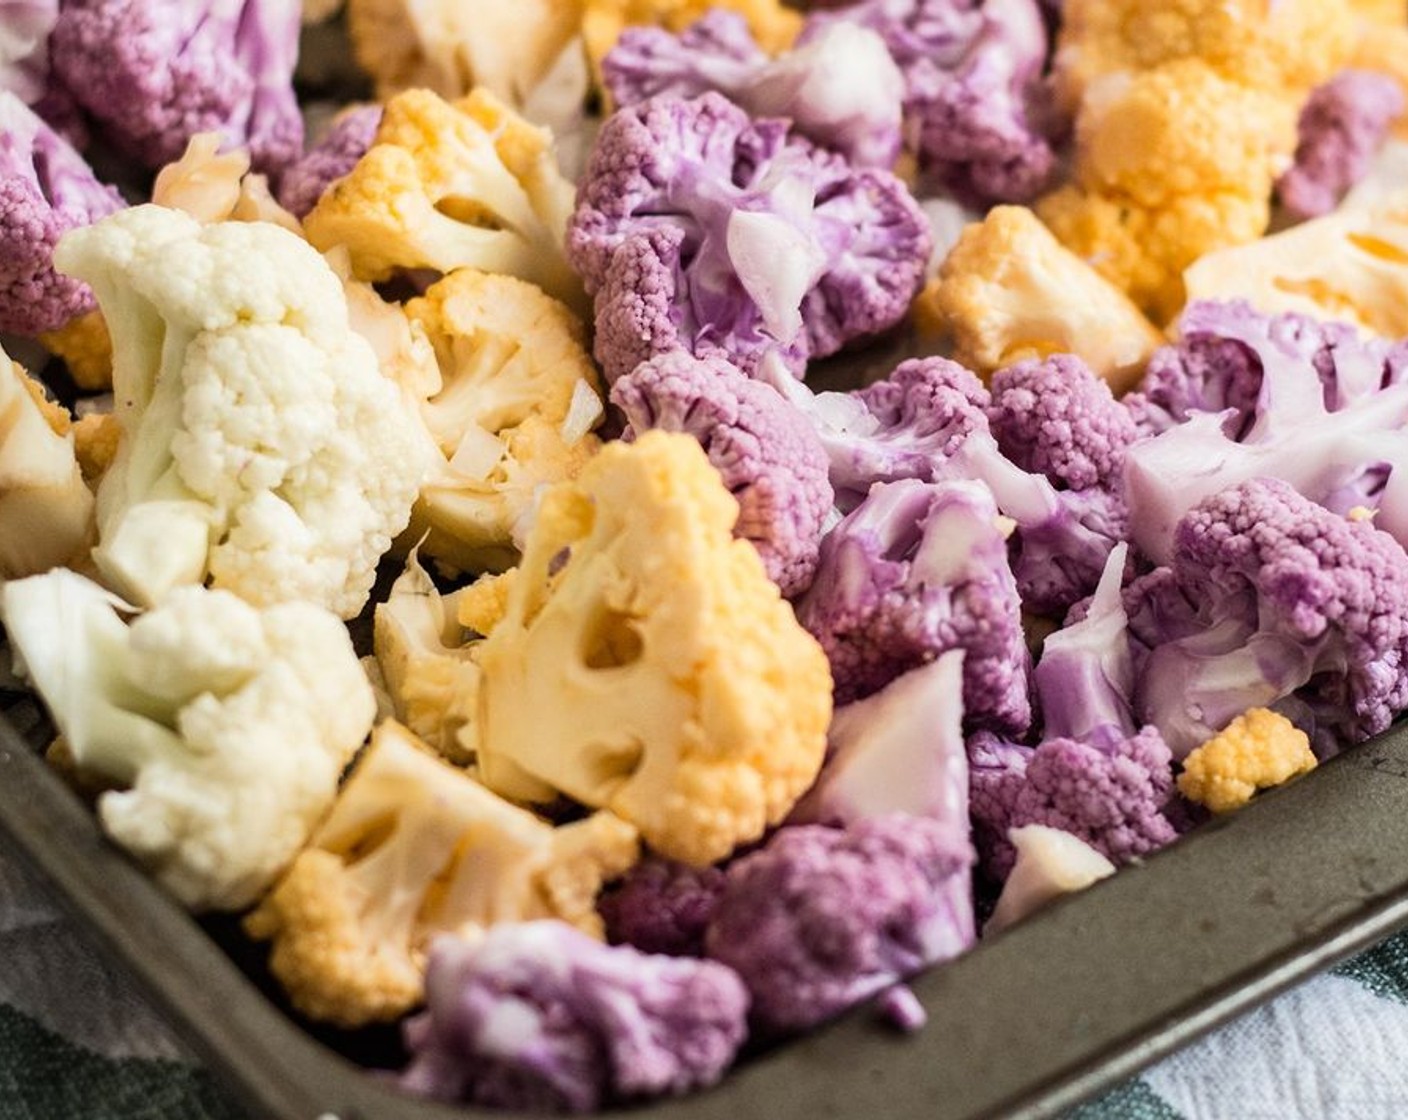 step 2 Add Cauliflower (2 heads) and Sweet Onions (1 1/2 cups) to a baking sheet. Drizzle with Coconut Oil (2 Tbsp). Roast the veggies for 20 minutes.